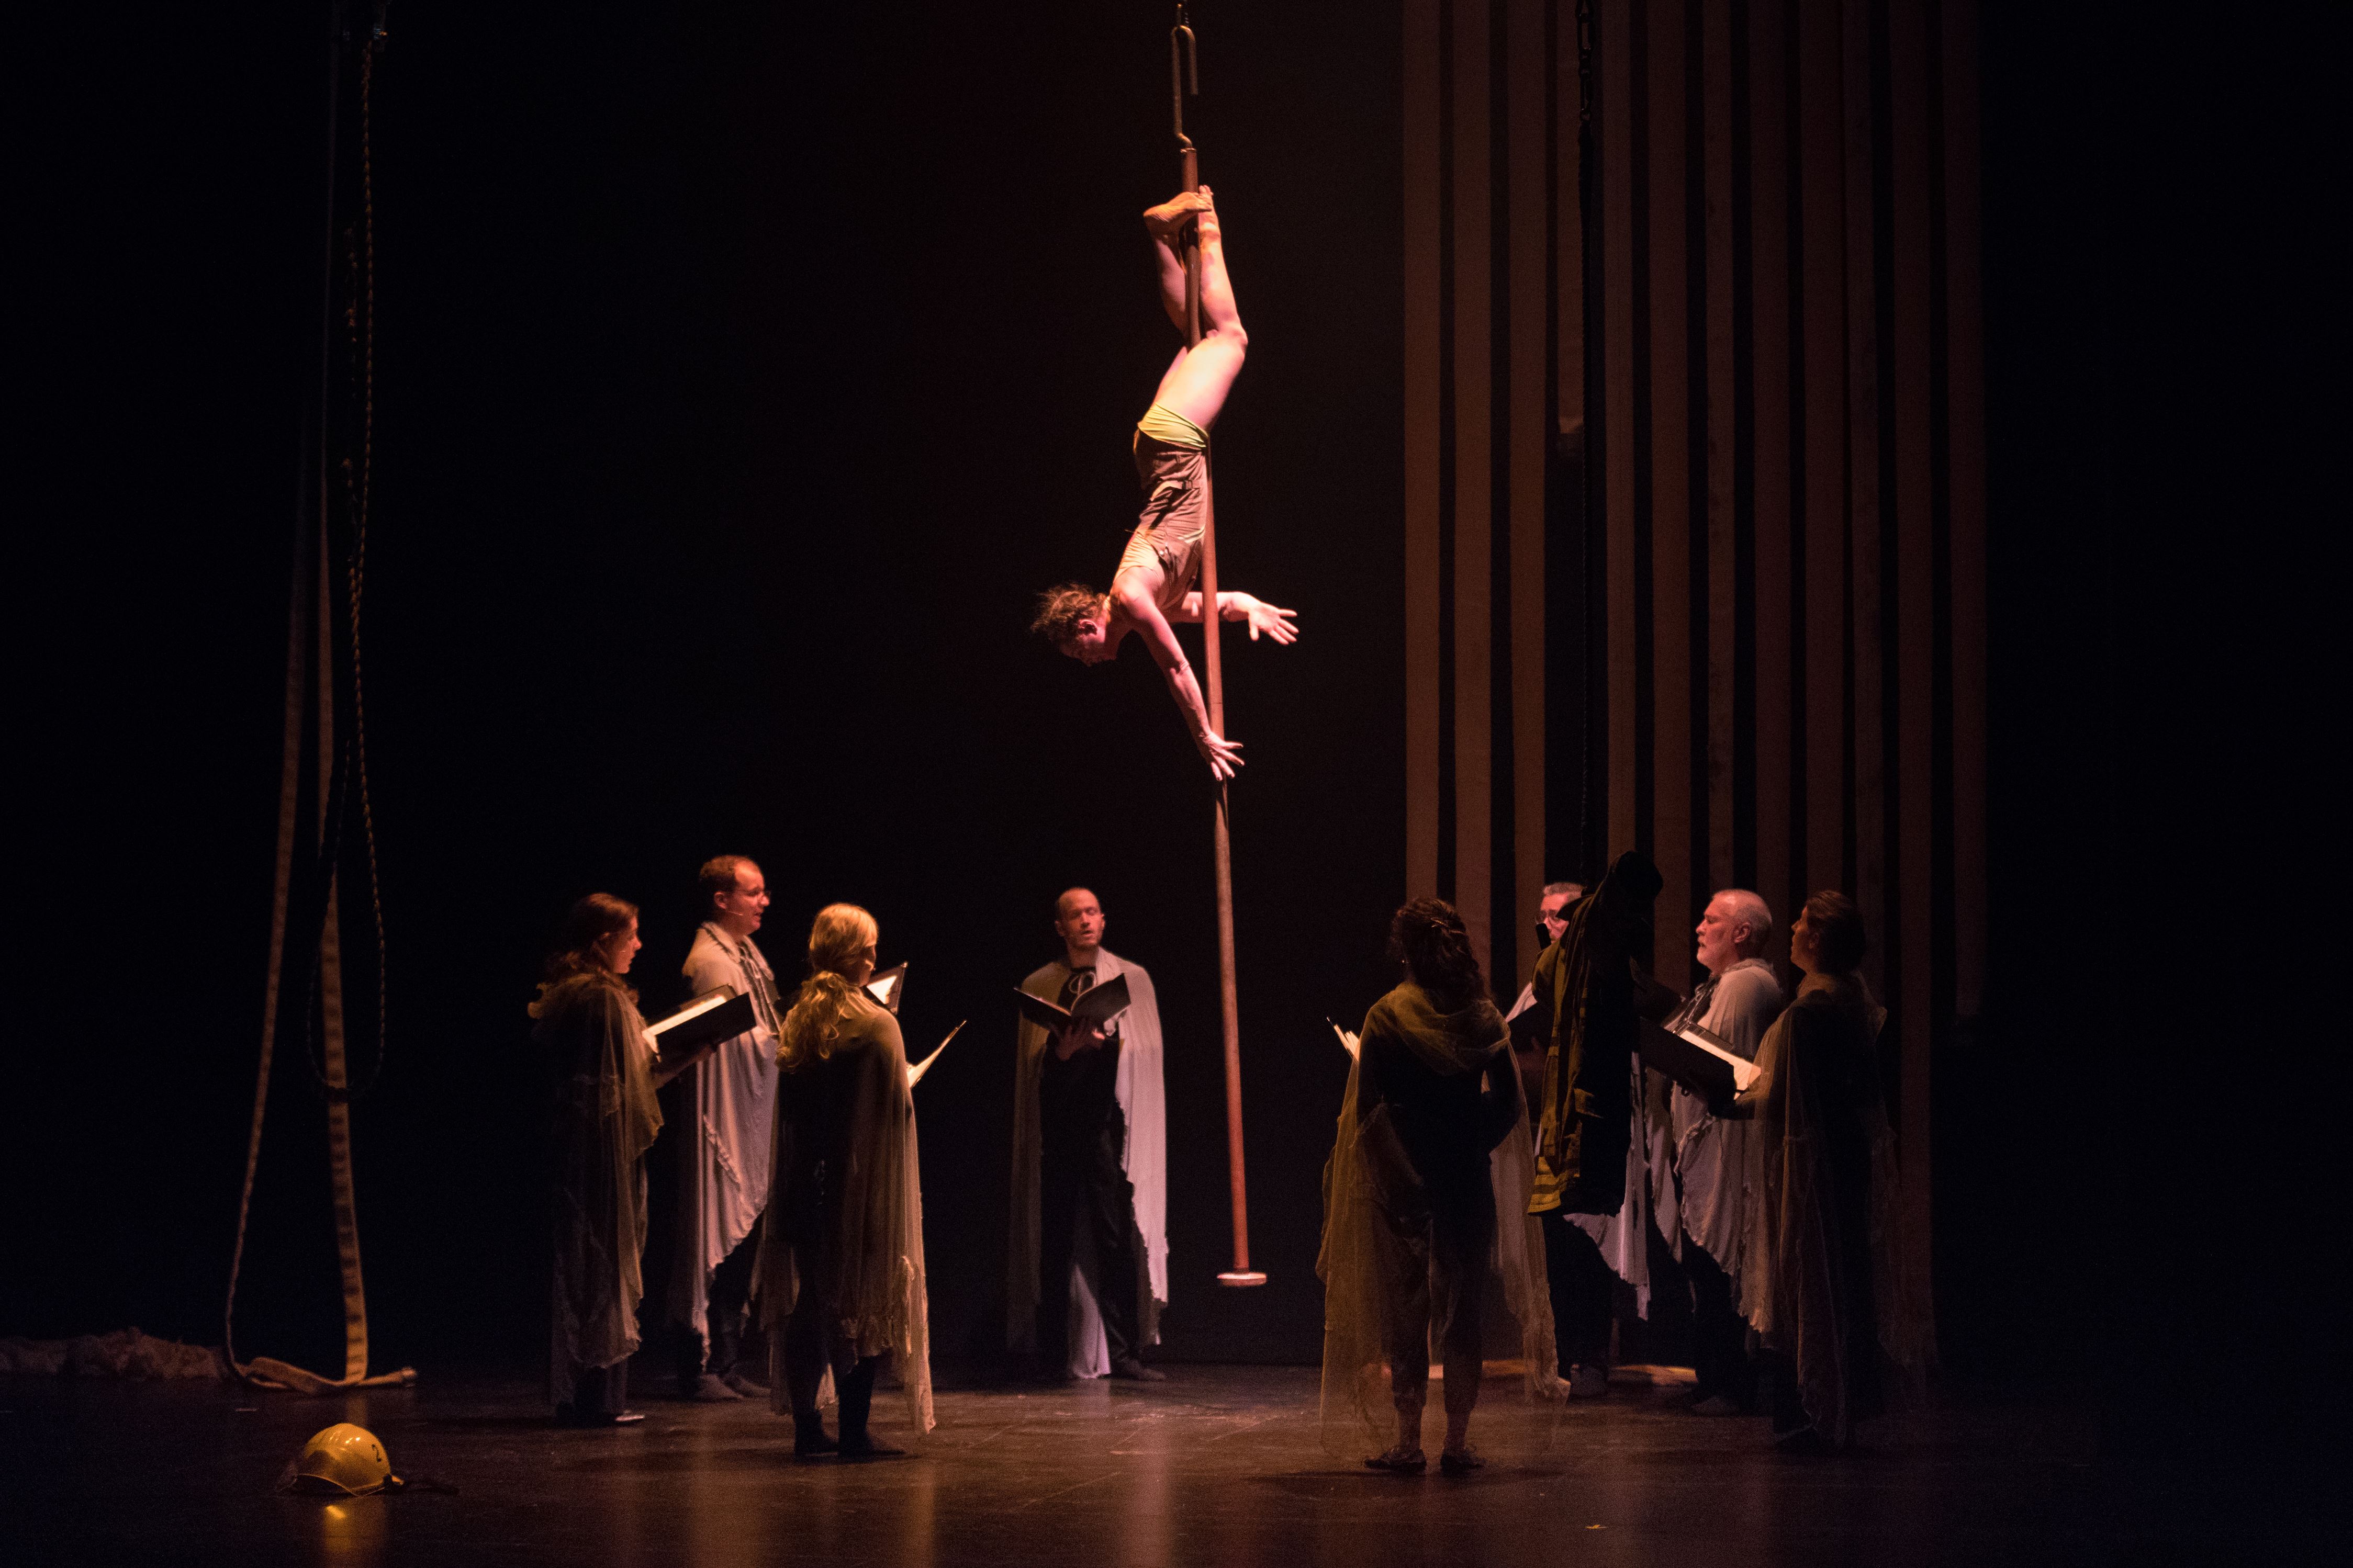 Holly Treddenick in one of her aerial dance scenes.